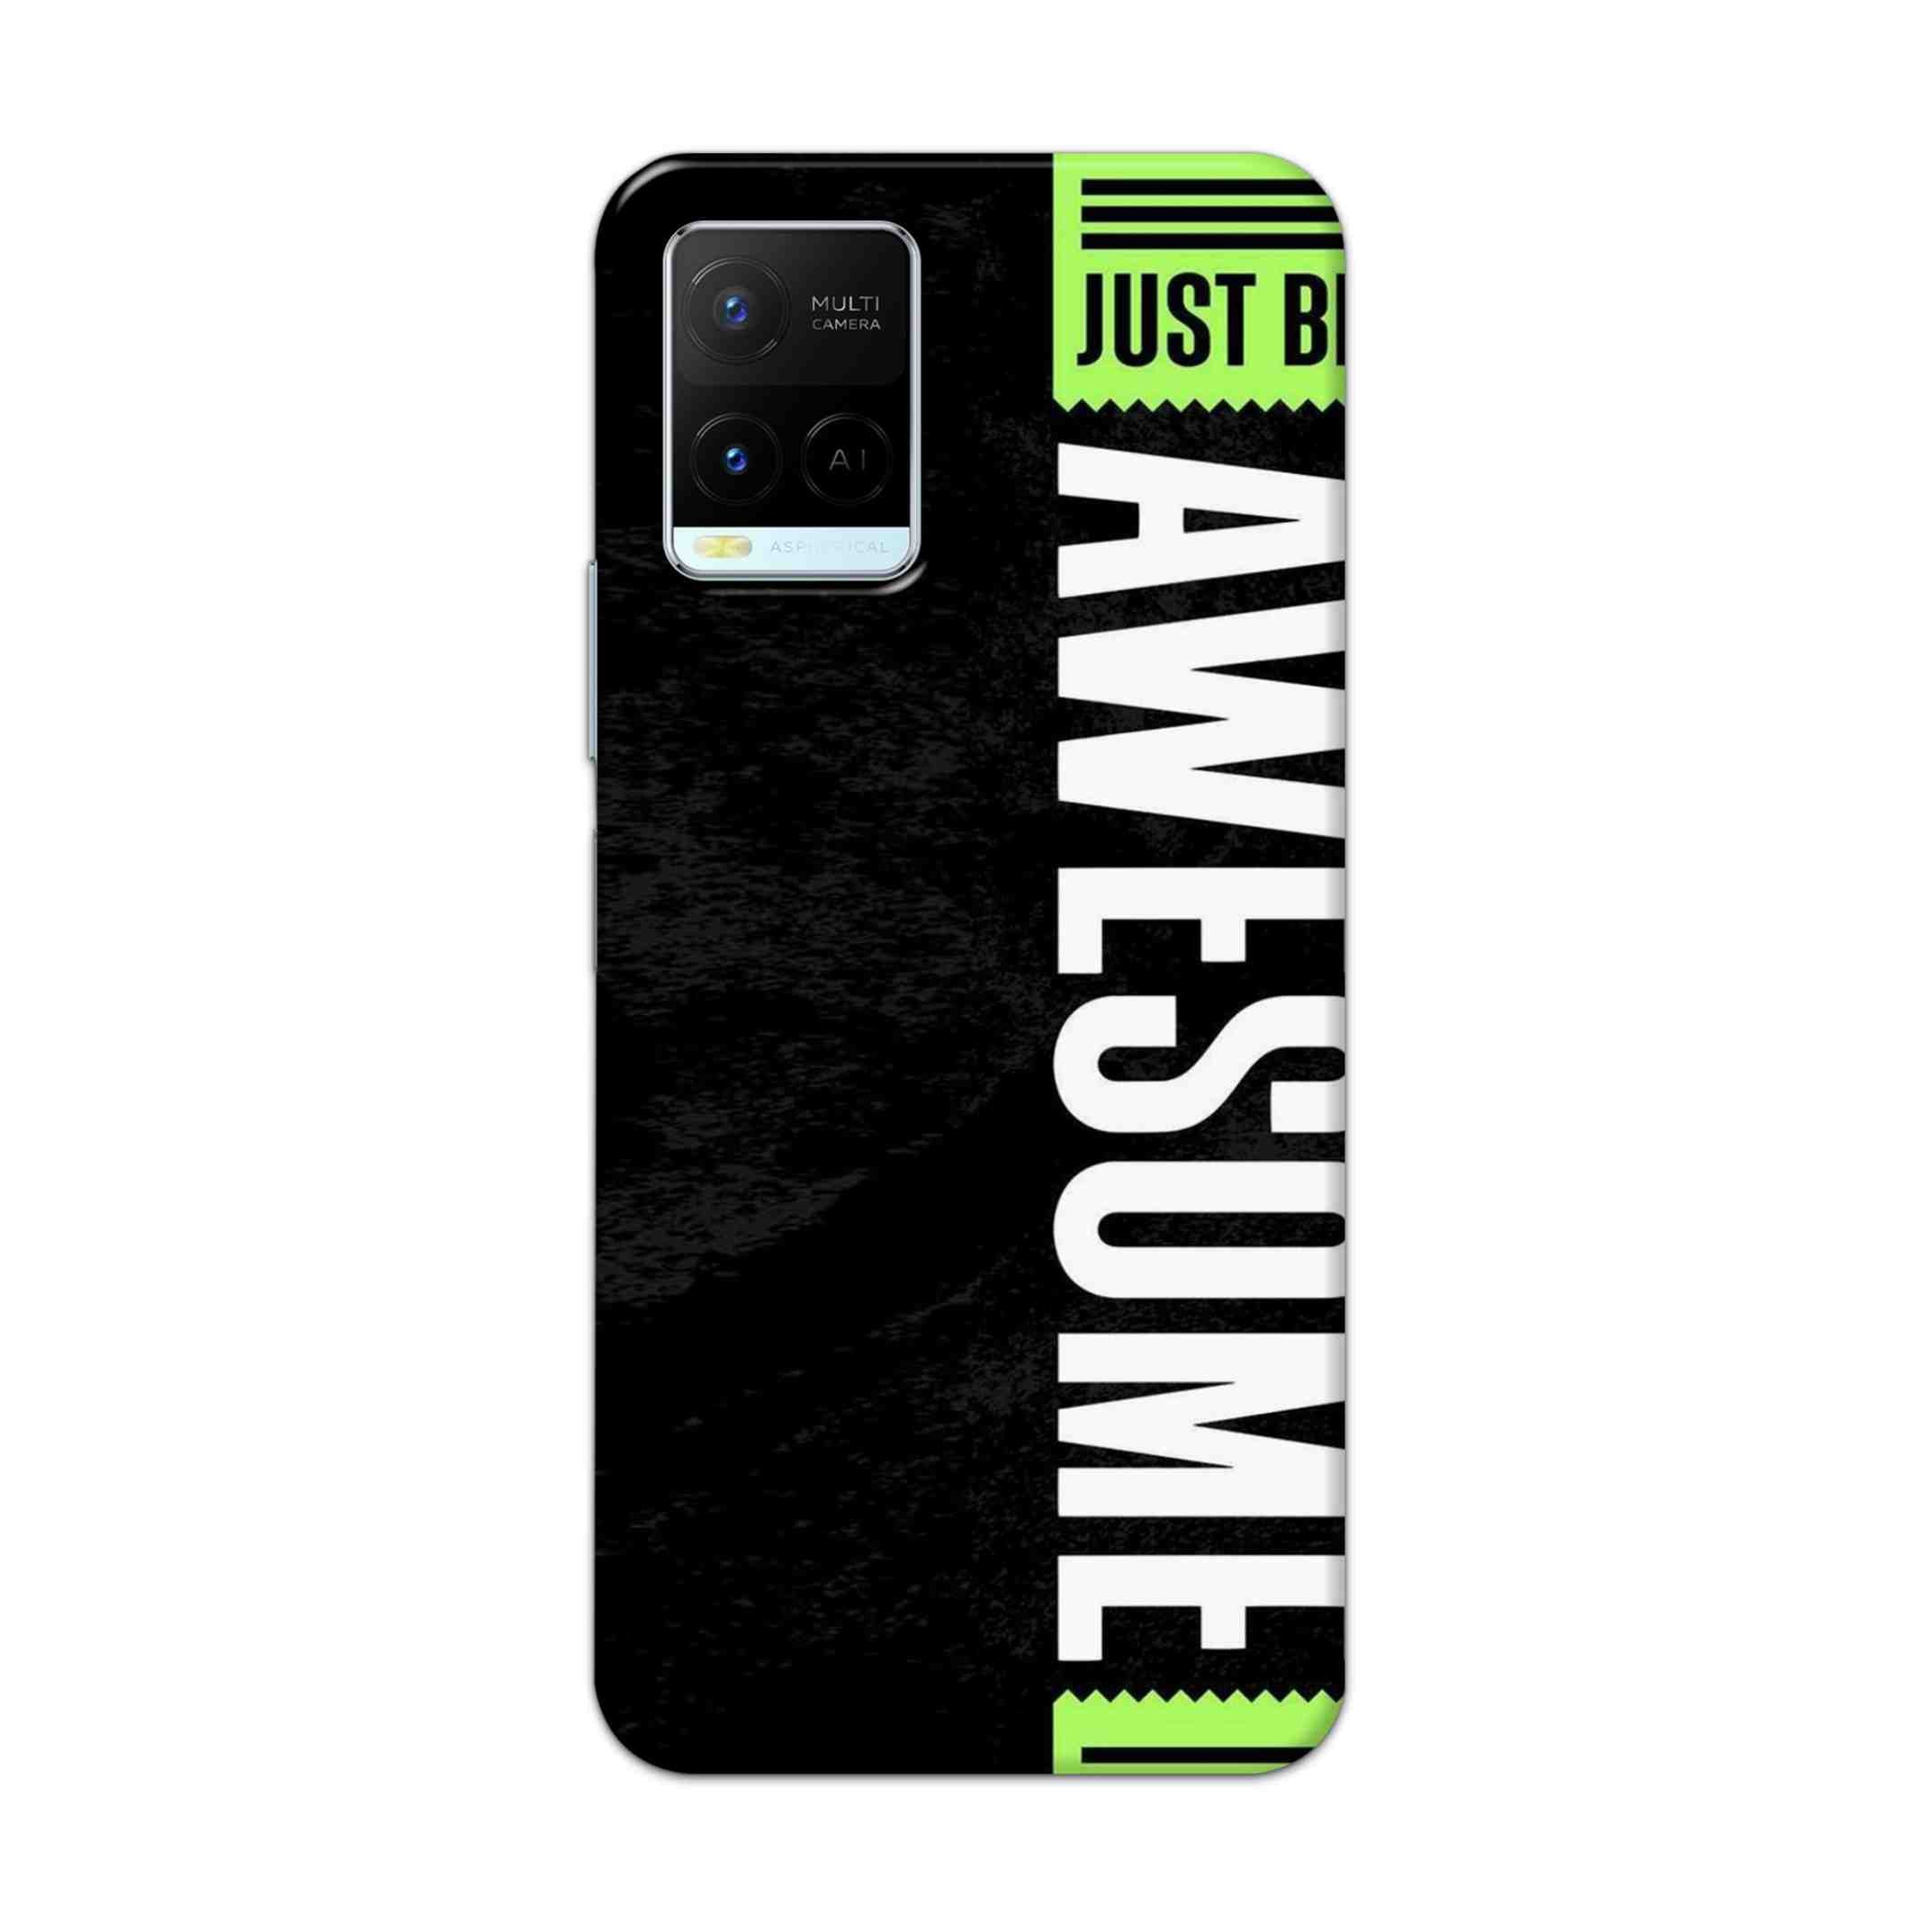 Buy Awesome Street Hard Back Mobile Phone Case Cover For Vivo Y21 2021 Online